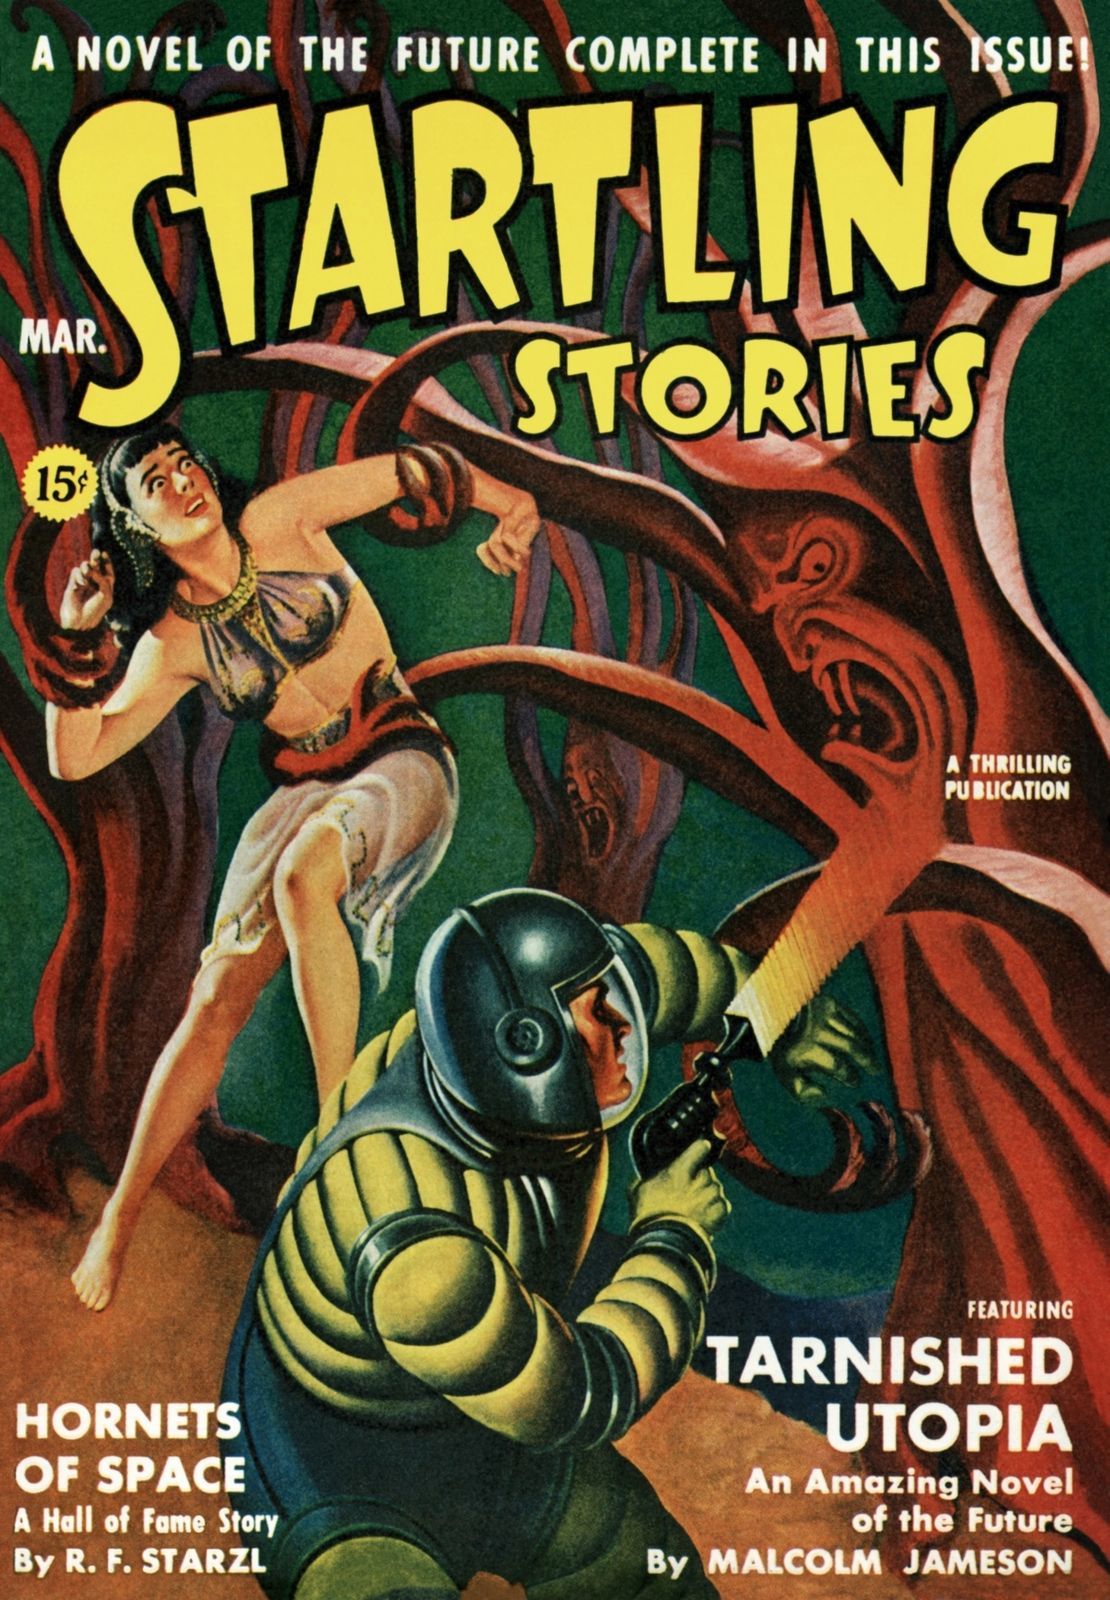 Primary image for Pulp SciFi Prints: Tarnished Utopia - Startling Stories - 1943